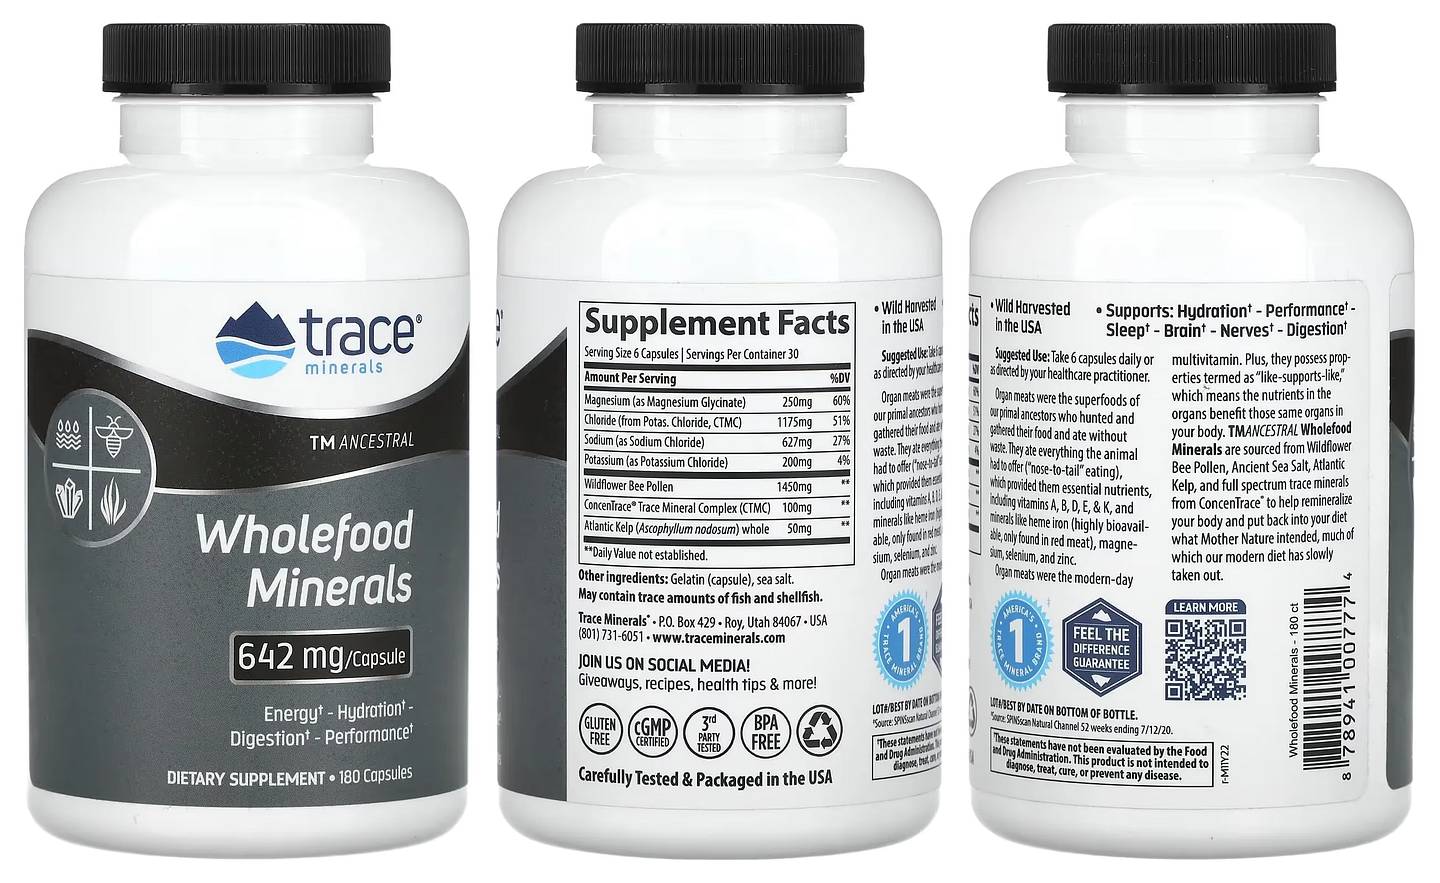 Trace Minerals, TM Ancestral, Wholefood Minerals, 642 mg packaging